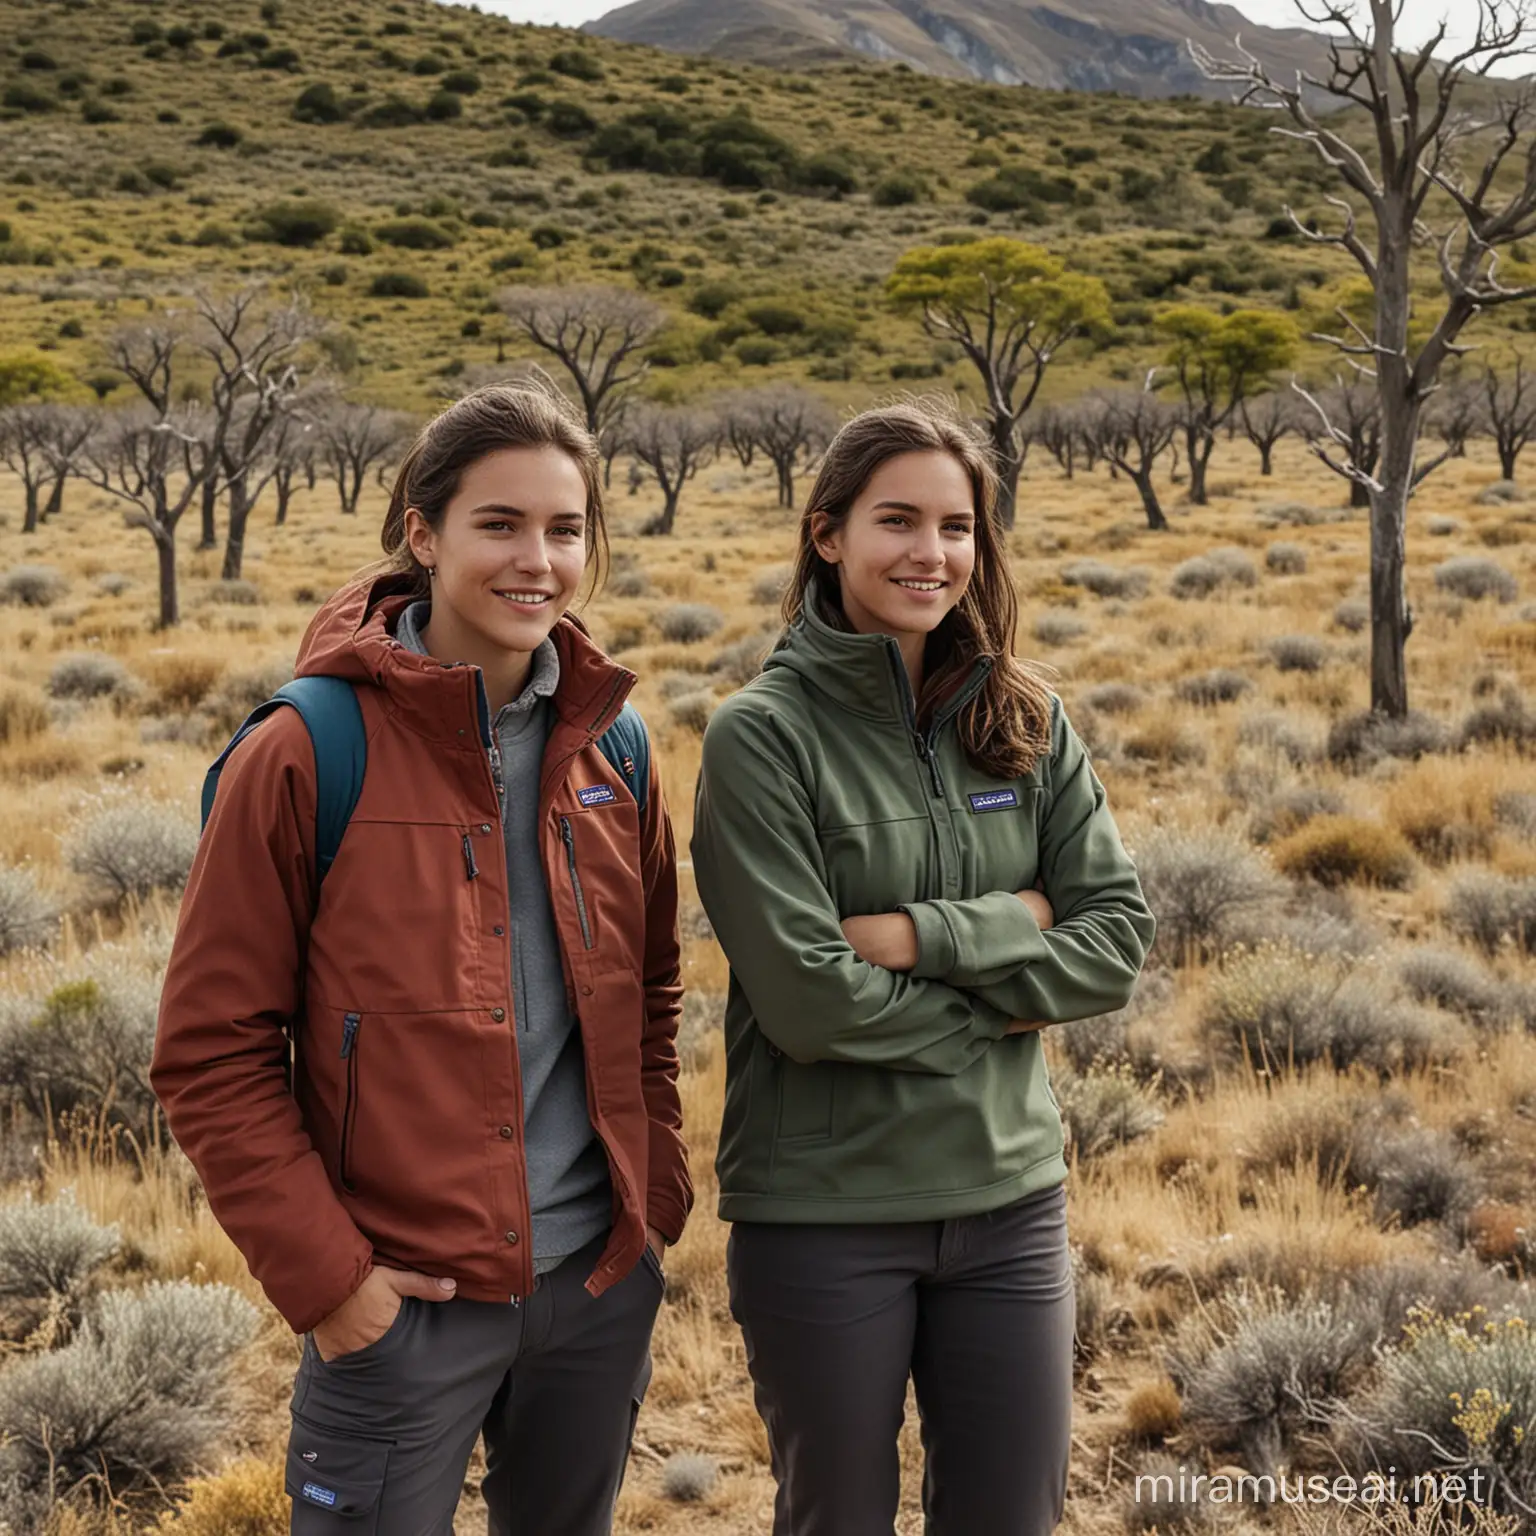 Patagonia clothing worn by younger man and women in nature with lots of trees and open land promoting safe environment